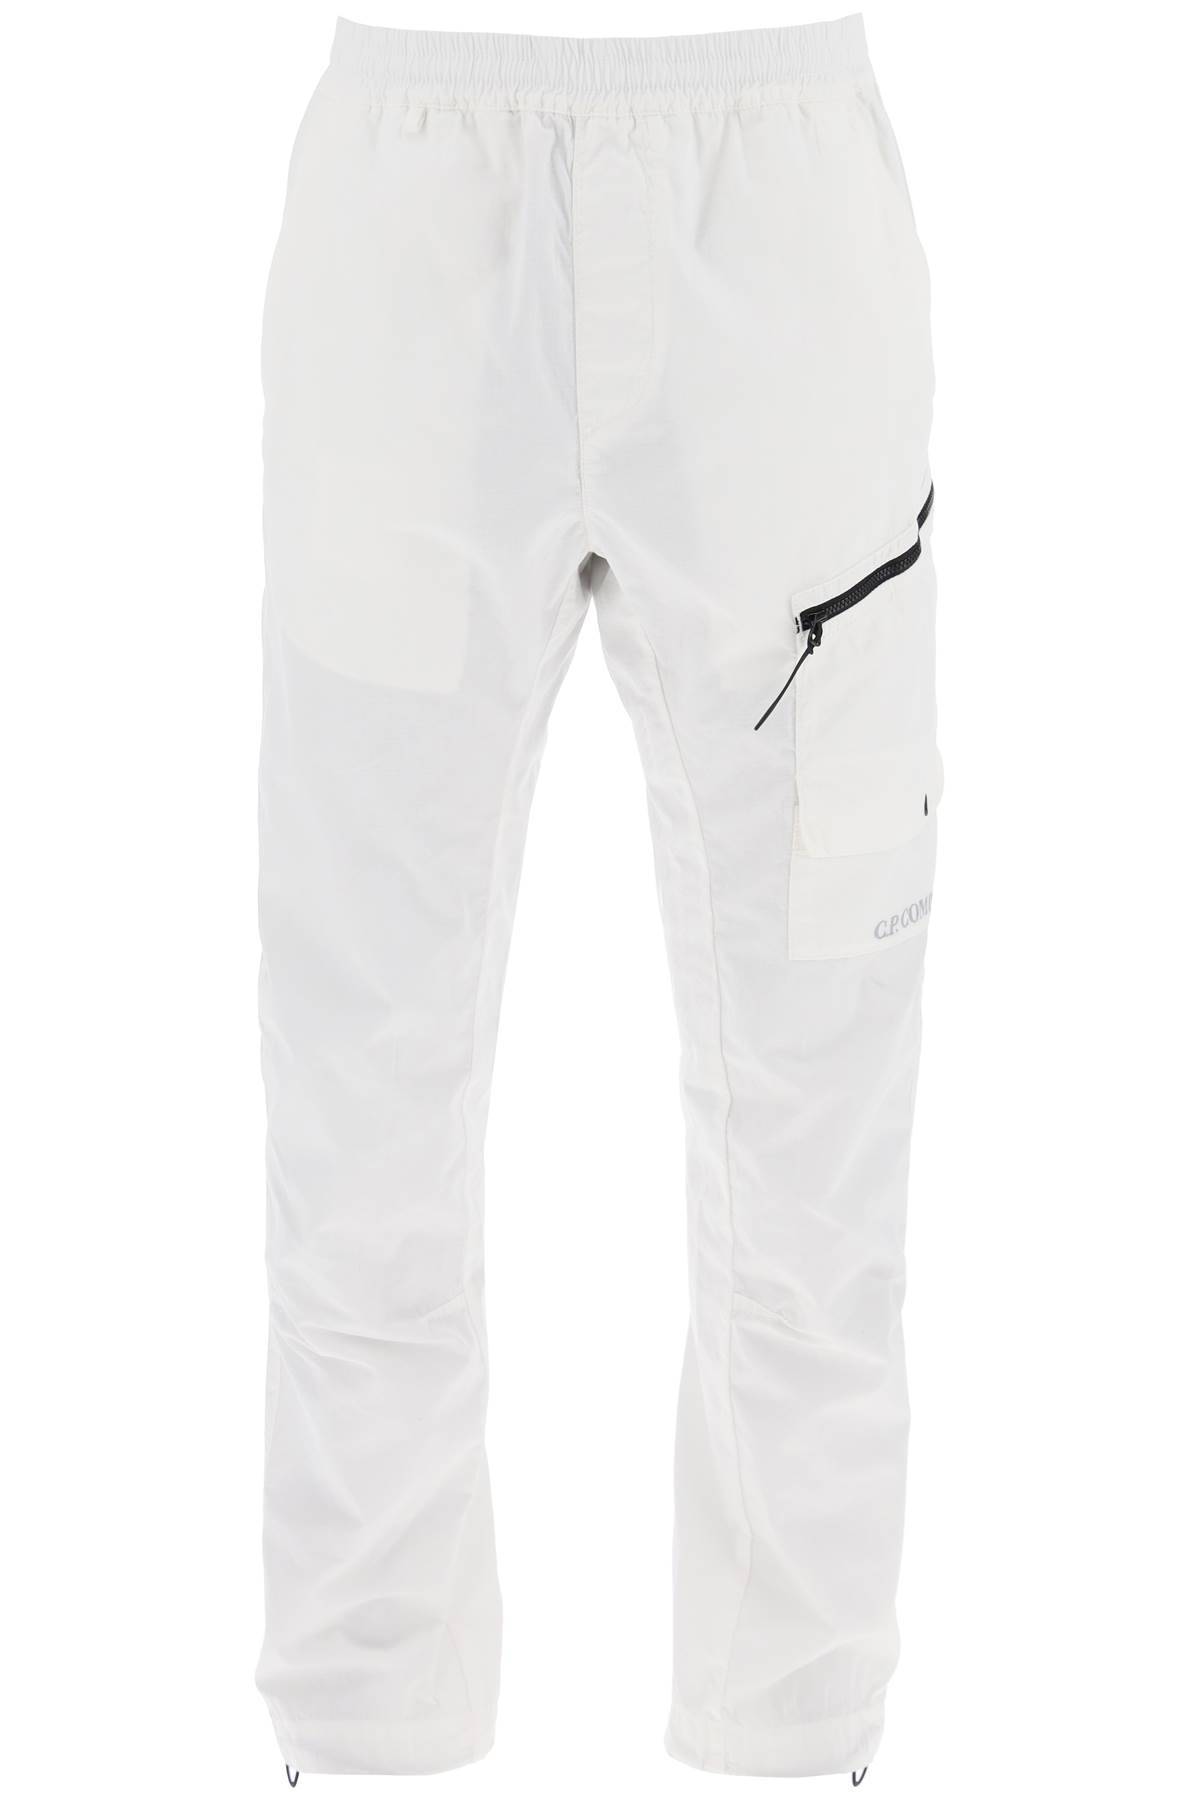 CP COMPANY CP COMPANY ripstop cargo pants in